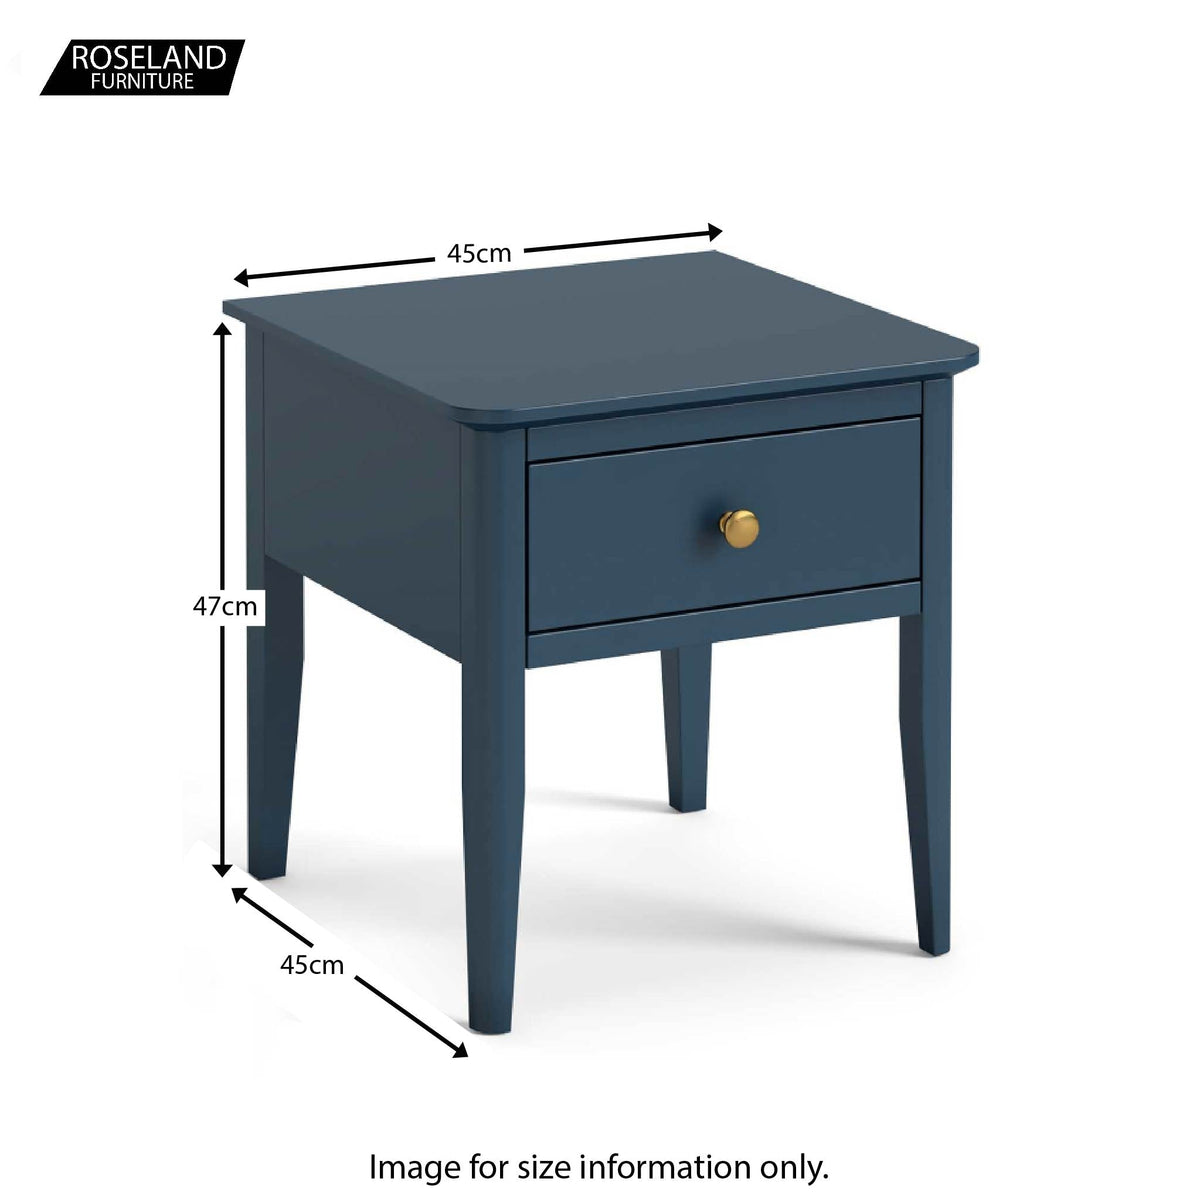 Stirling Blue Side Lamp Table size guide